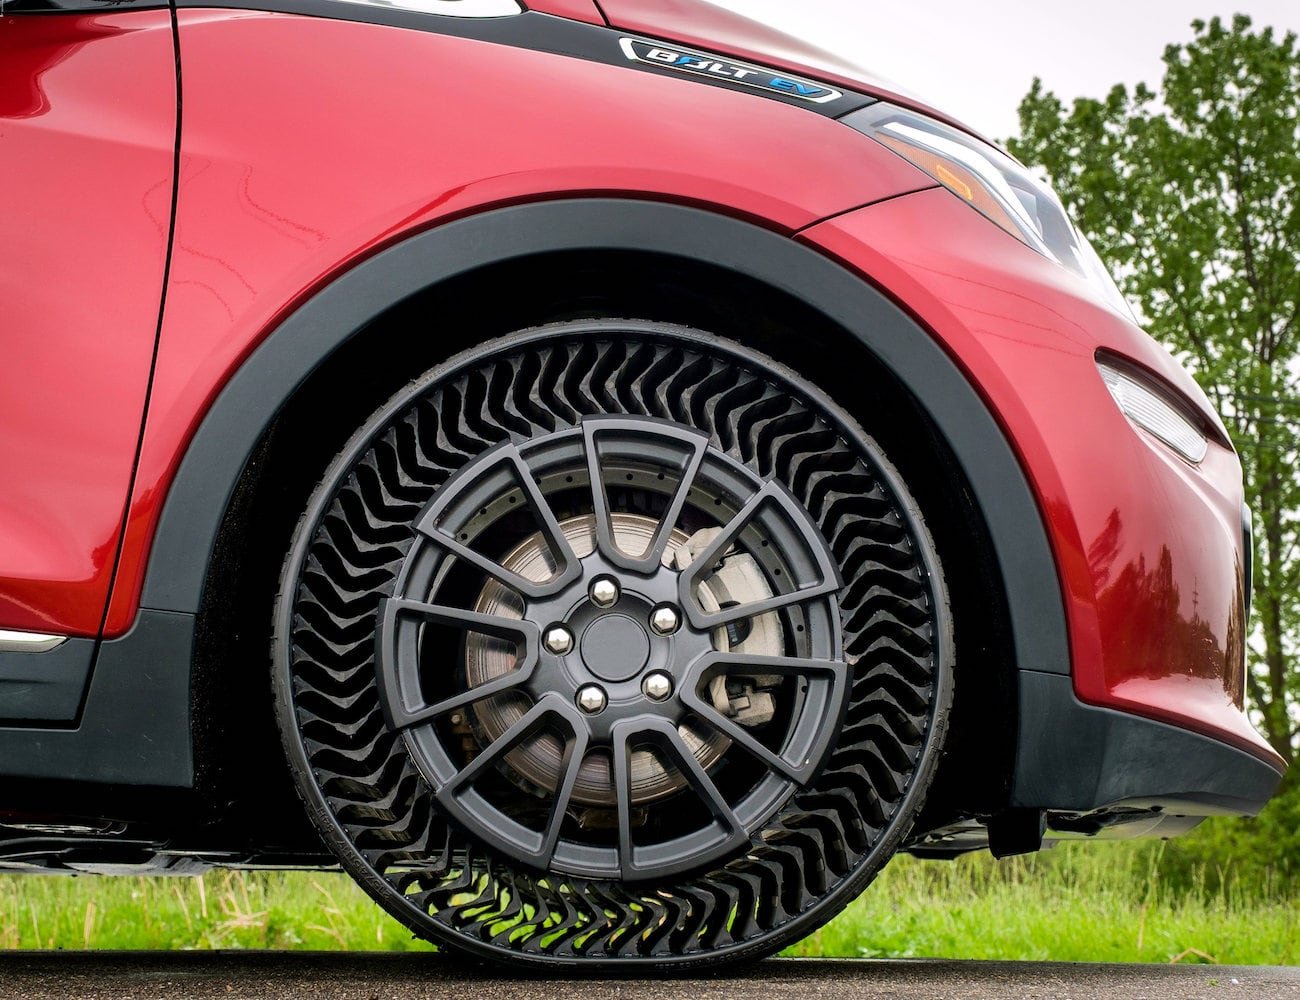 Michelin Uptis Airless Vehicle Wheel makes it impossible for your car’s wheels to go flat